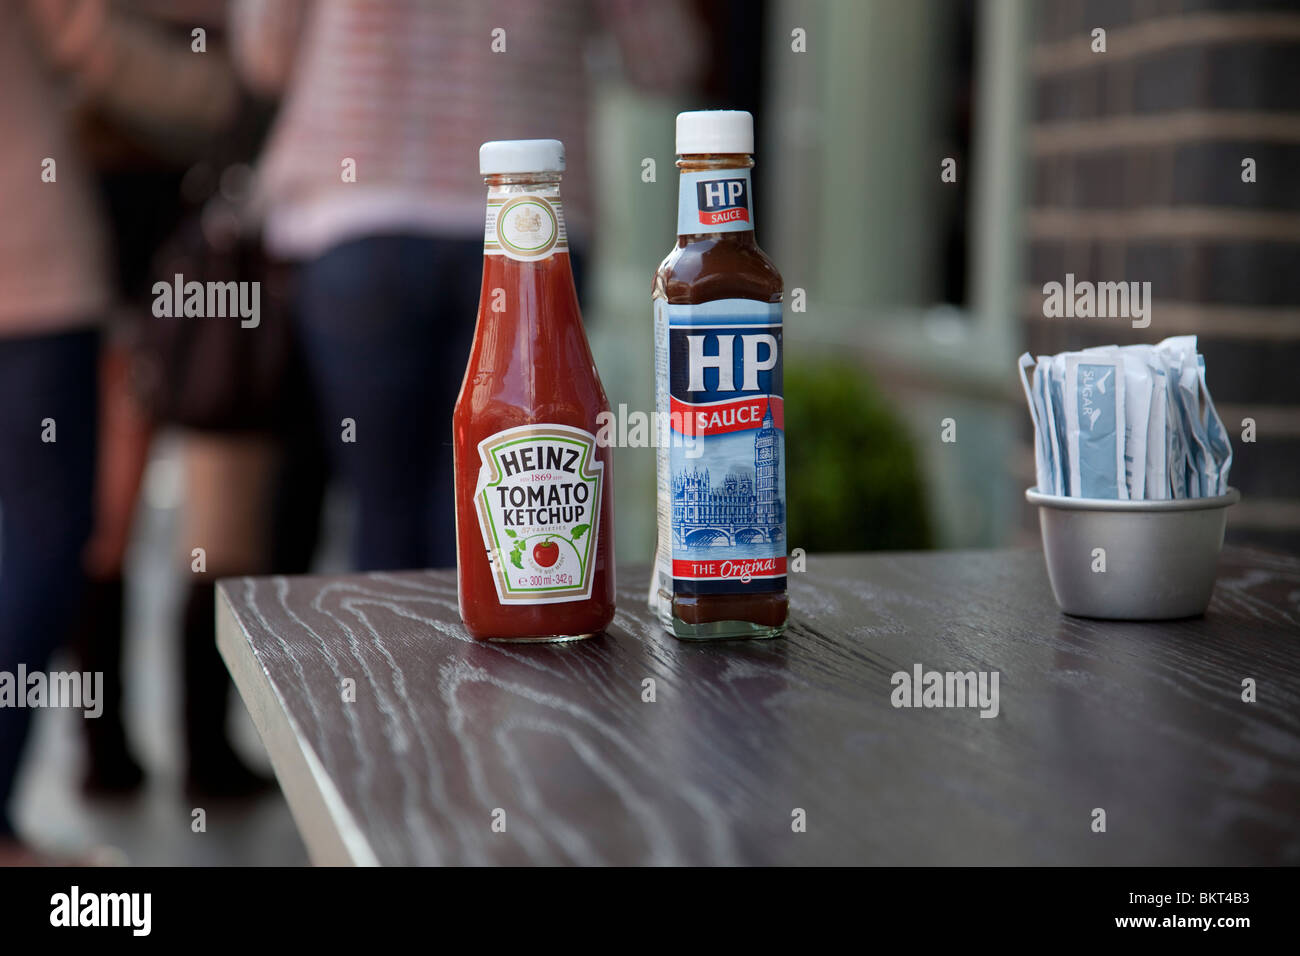 HP Sauce and Heinz Tomato Ketchup bottles outside a cafe. Two icons of the sauce world. Stock Photo